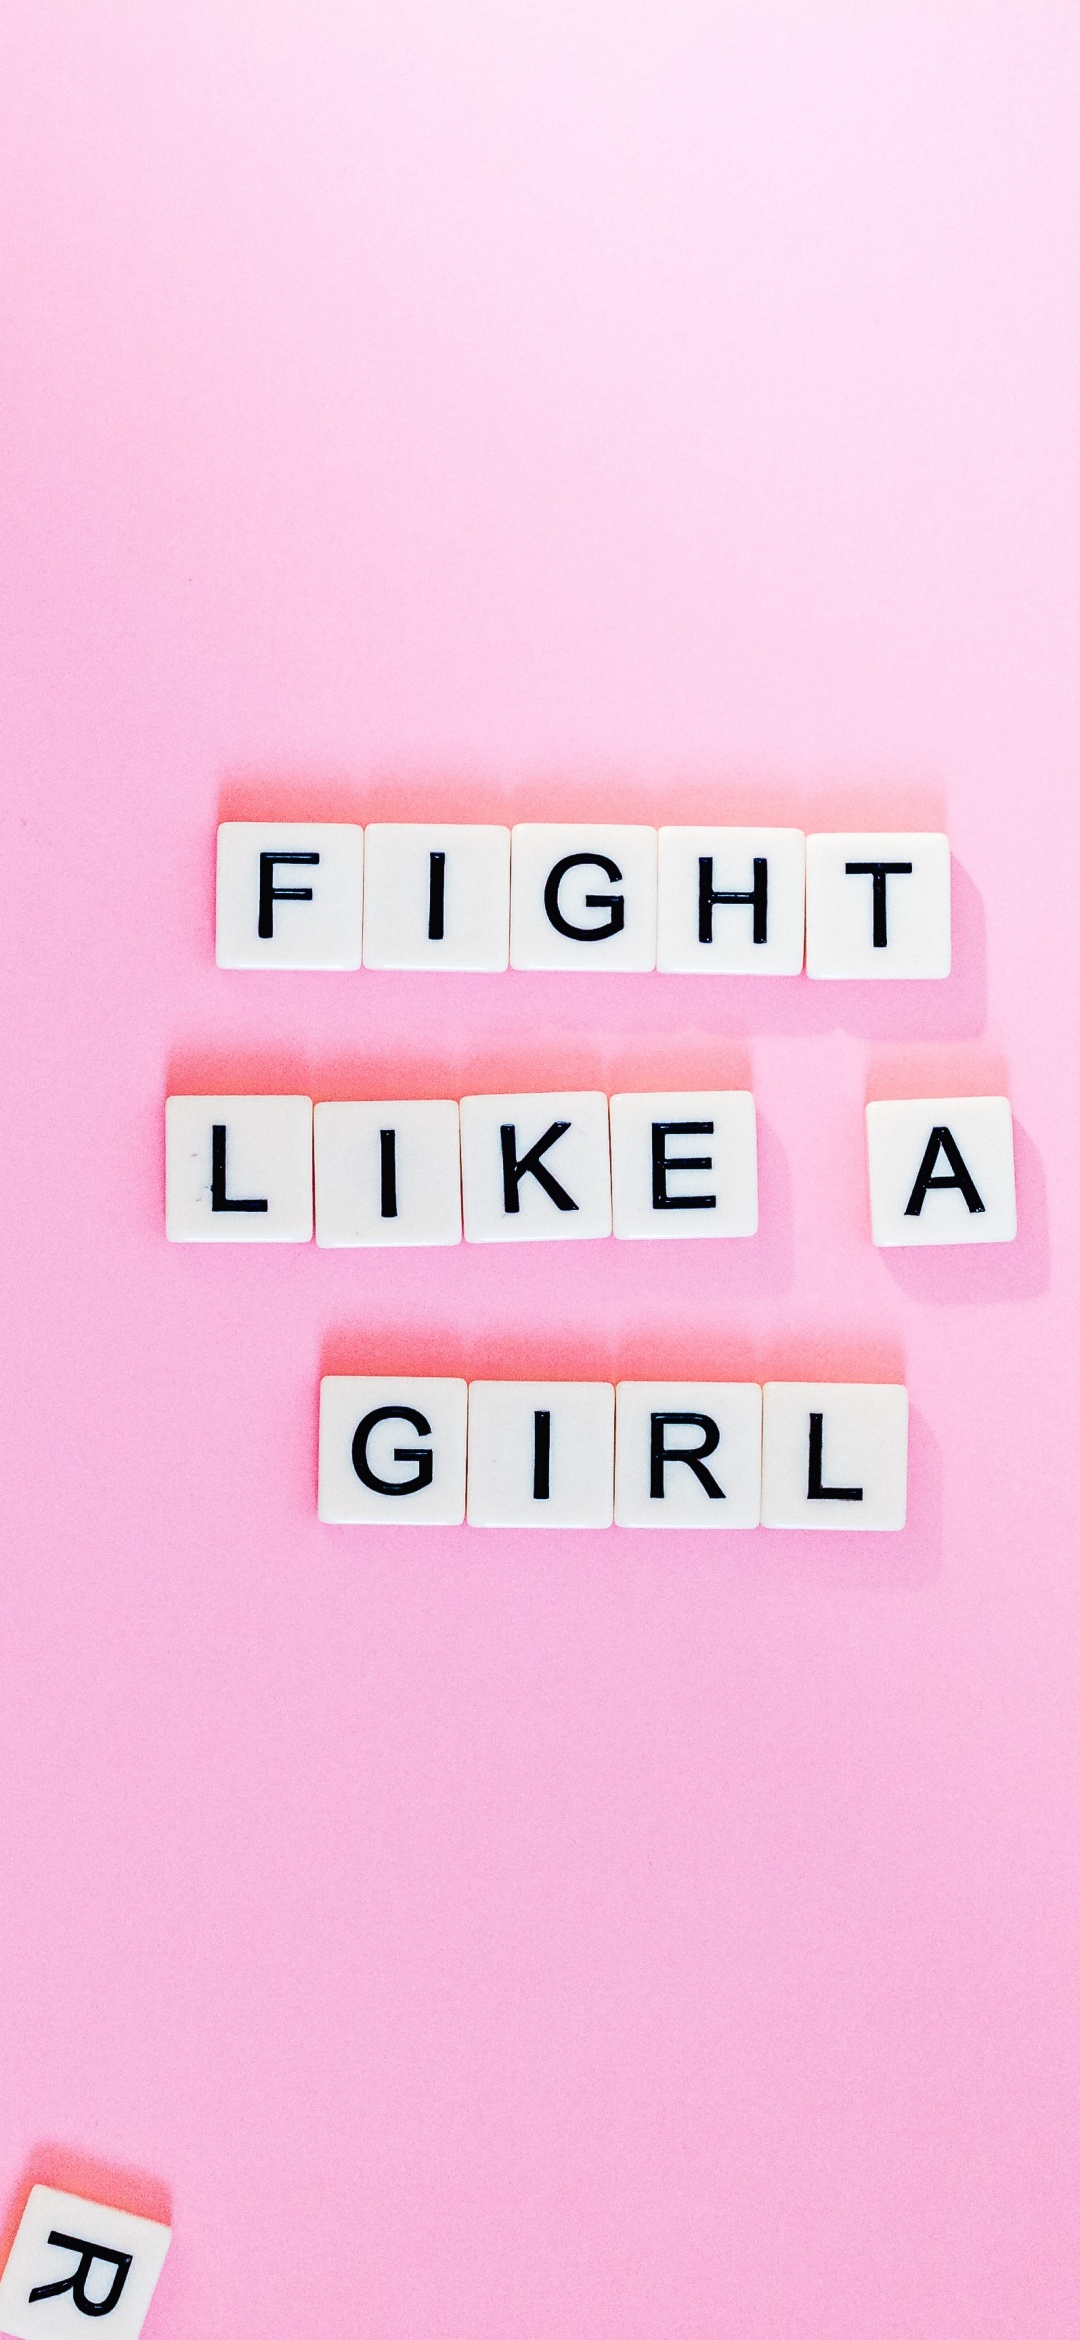 Fight Like A Girl Wallpaper 4K, Pink background, Letters, Girly